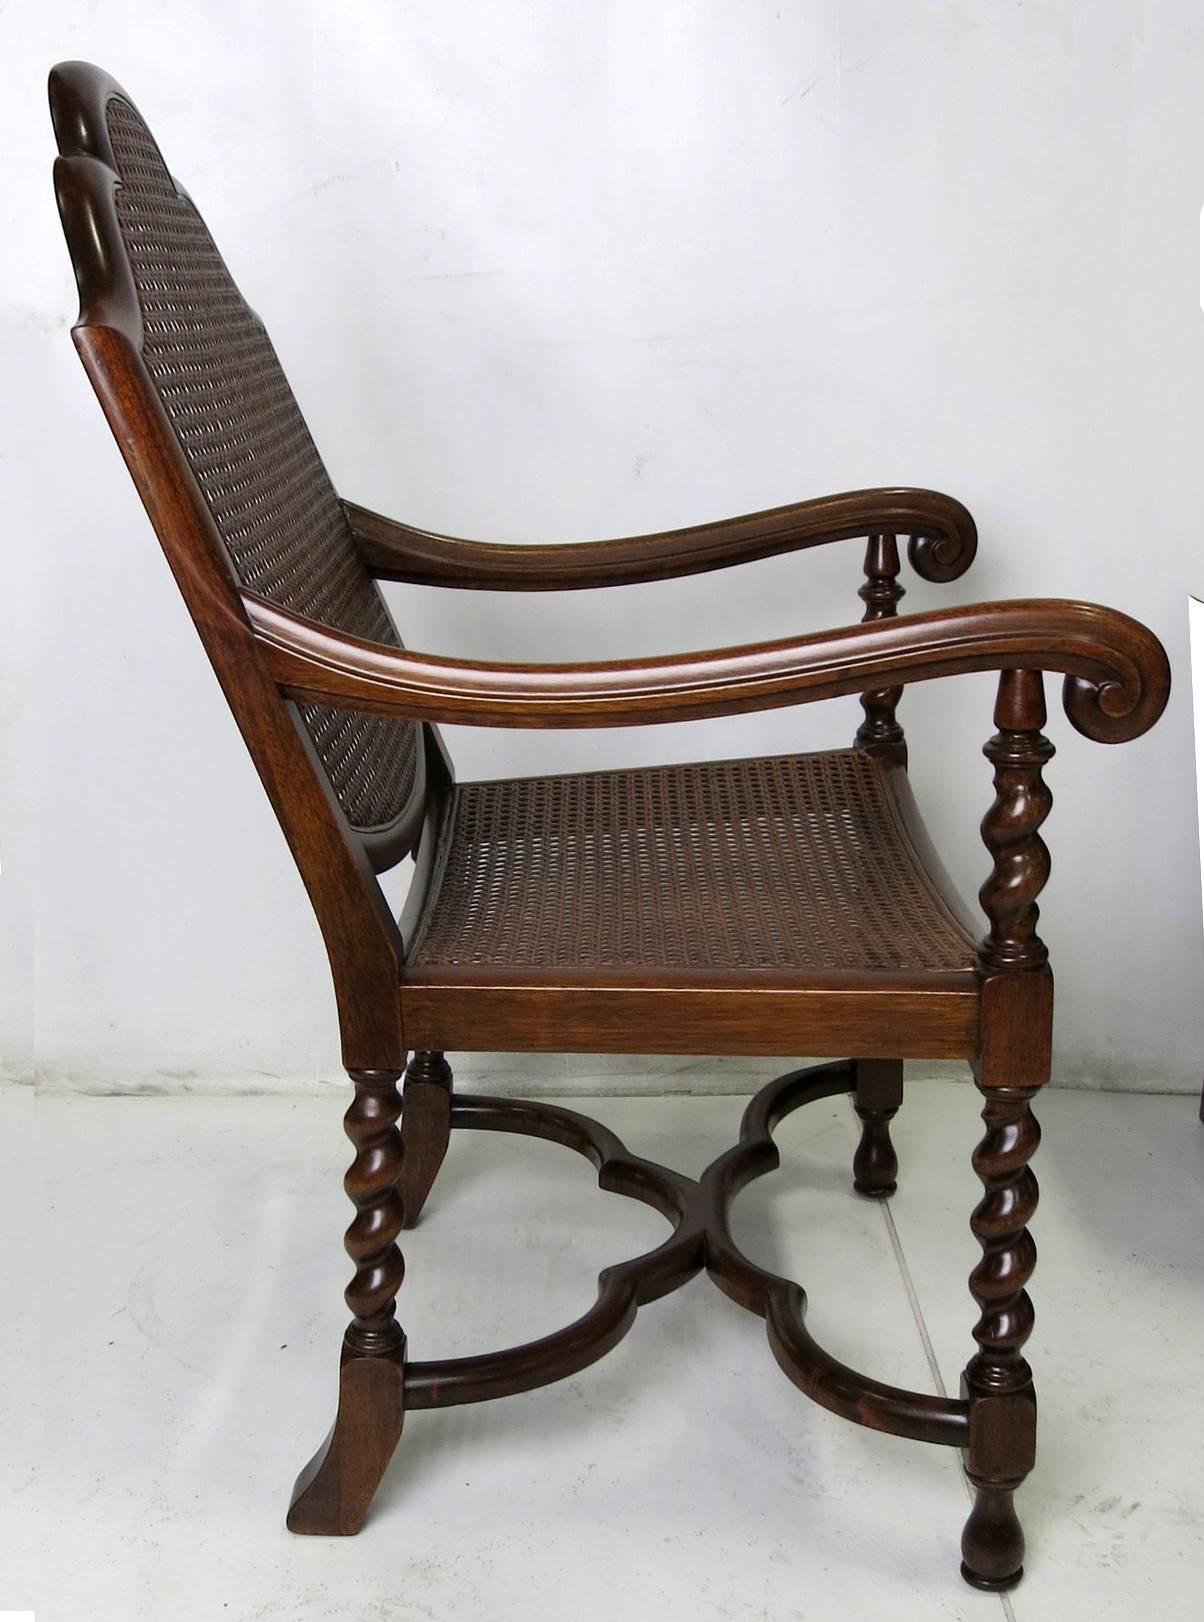 Italian Exquisite Early 20th Century Mahogany and Cane Baroque Armchair